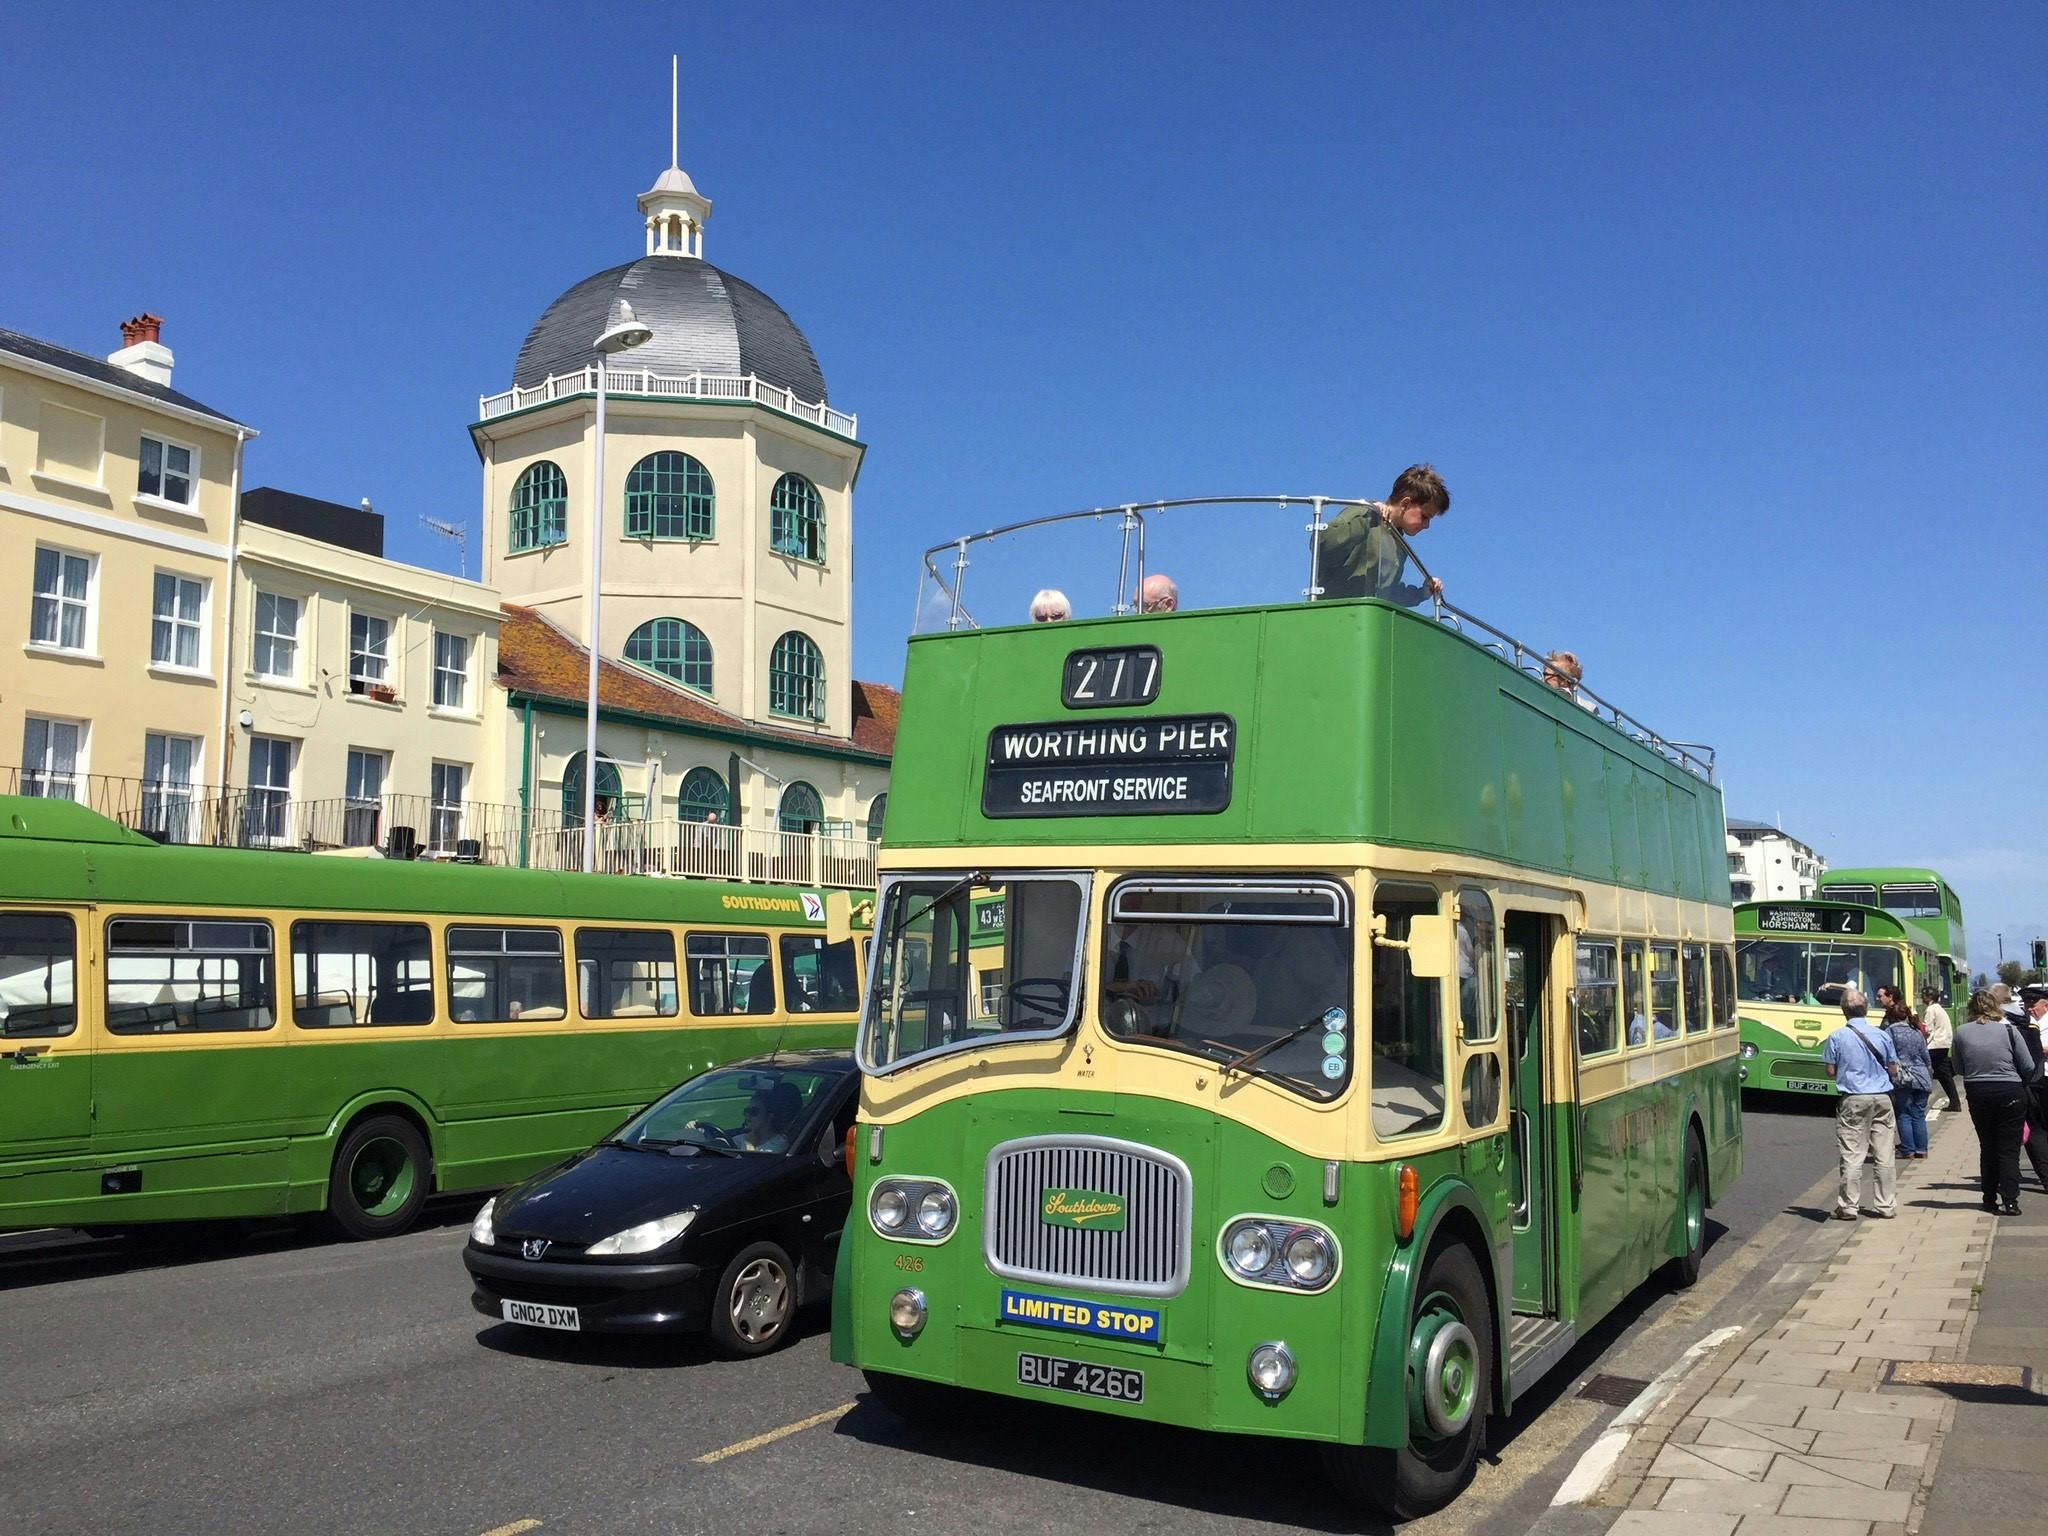 Vintage open-topped bus in Worthing